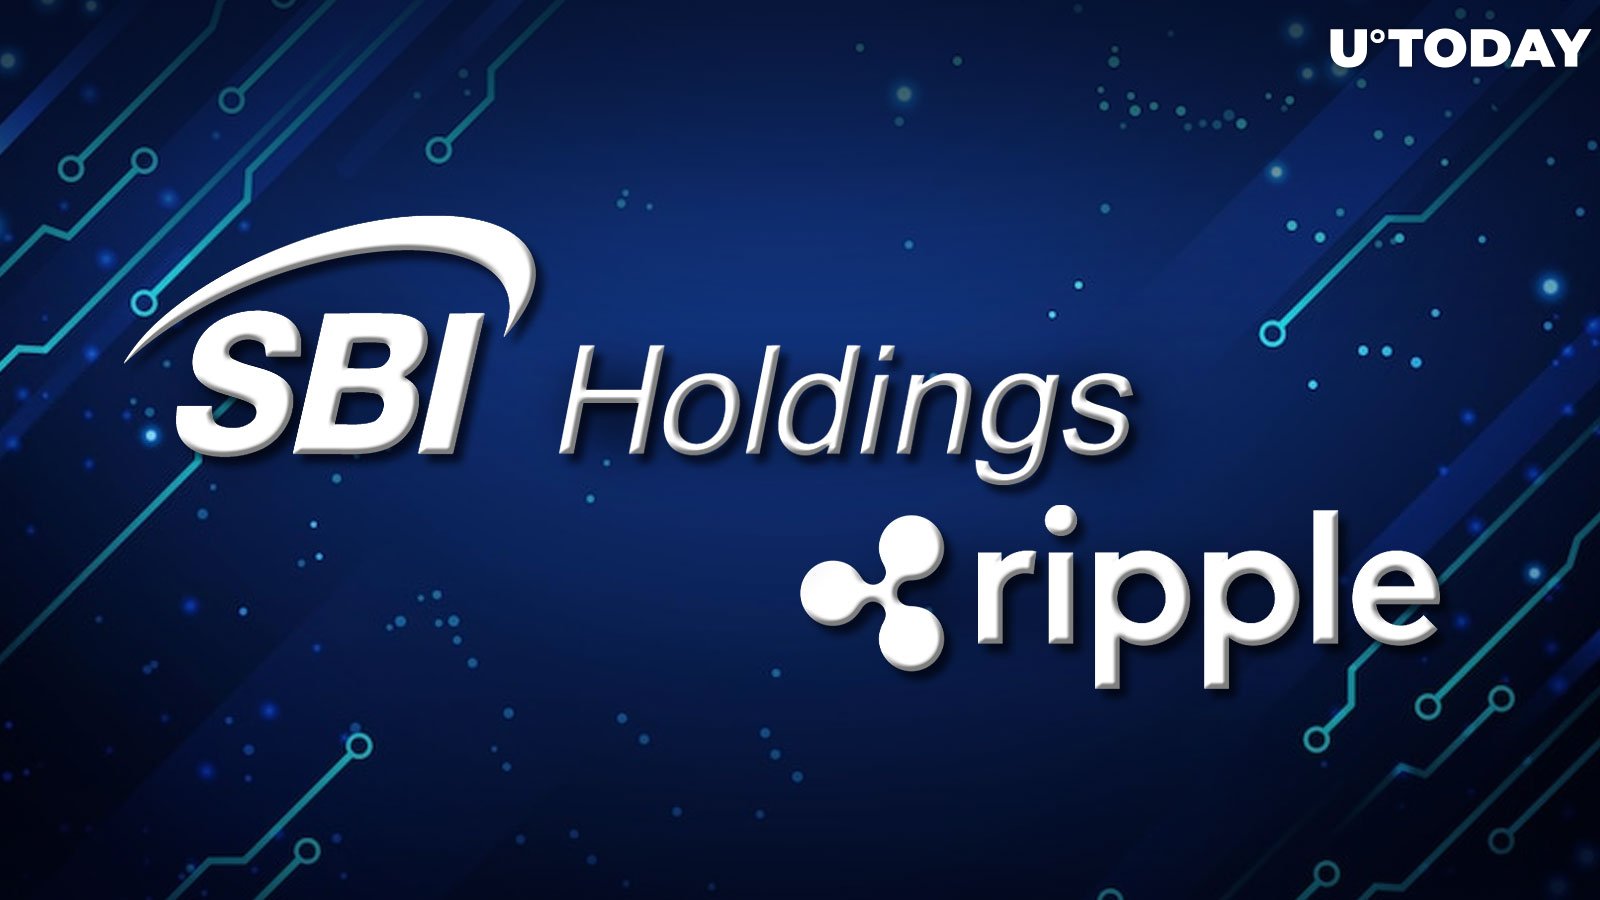 Ripple's Partnership Expansion Co-signed by SBI Holdings' CEO